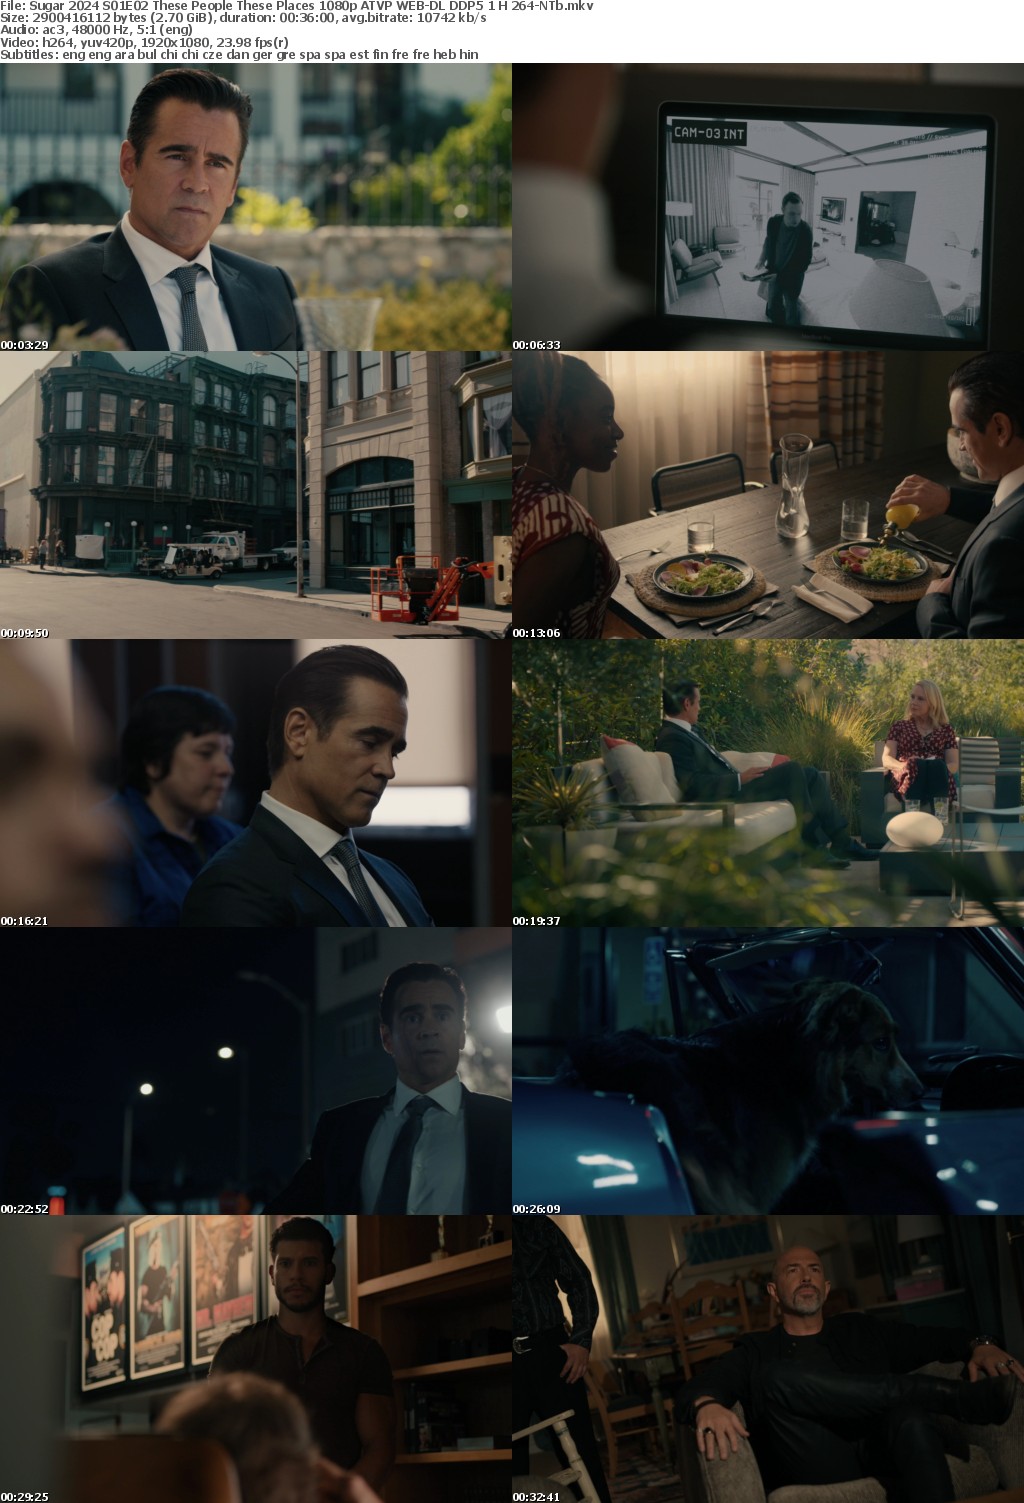 Sugar 2024 S01E02 These People These Places 1080p ATVP WEB-DL DDP5 1 H 264-NTb